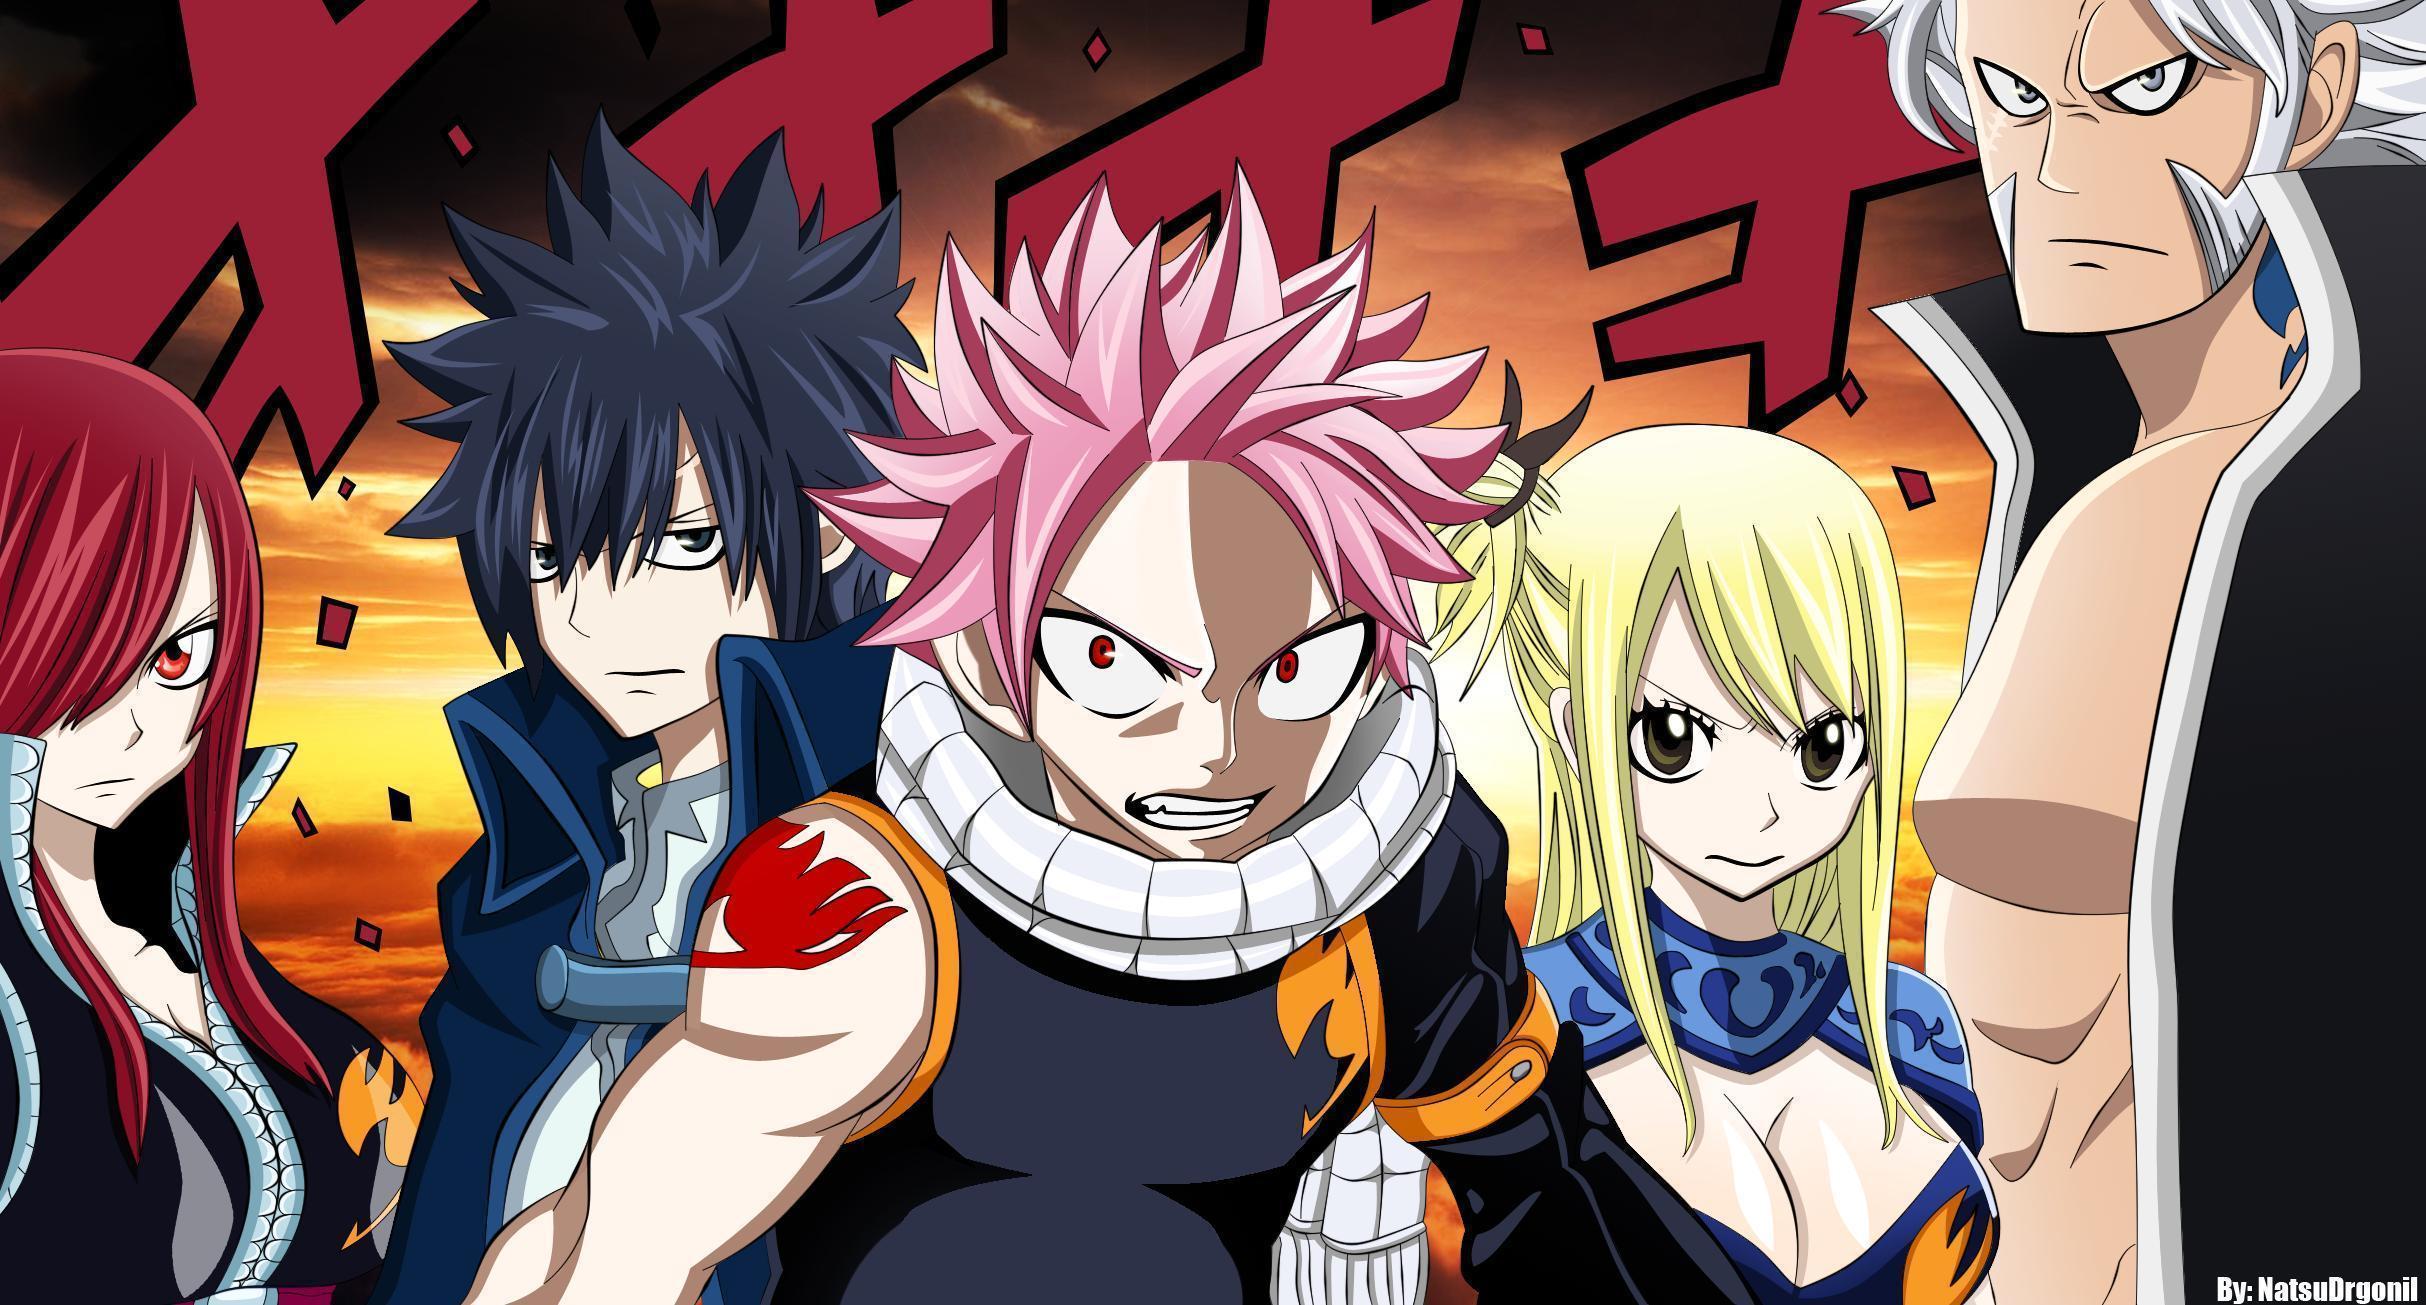 UNSEEN Fairy Tail Wallpaper!. Daily Anime Art